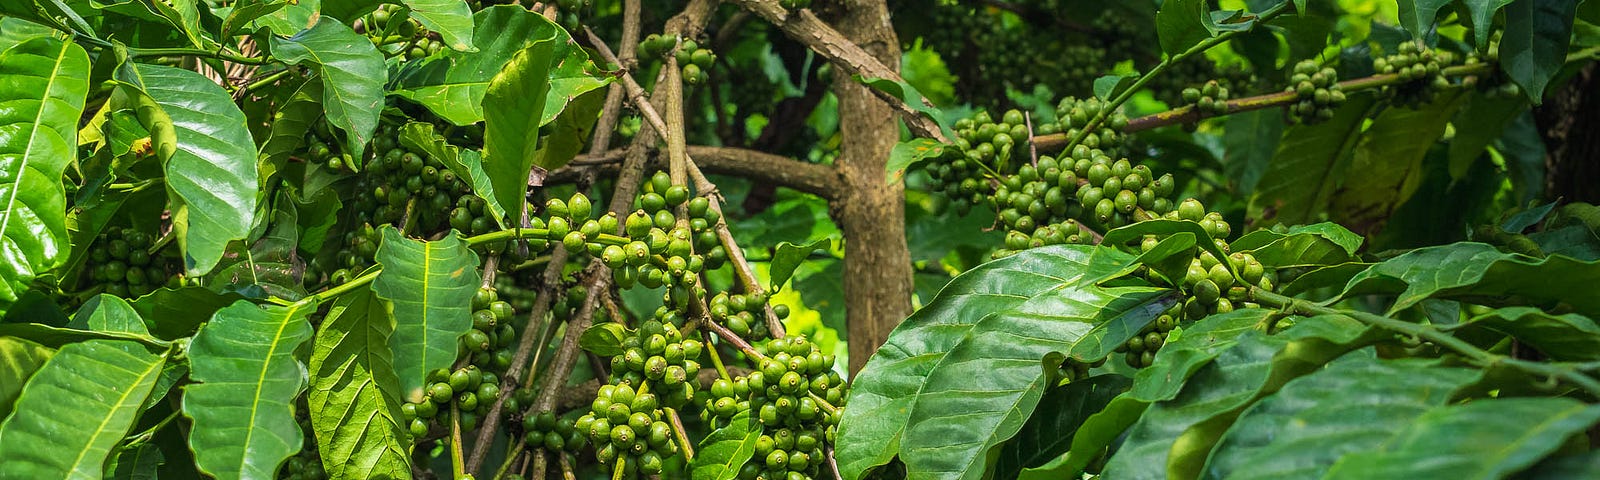 Robusta coffee berries, a month before harvest.